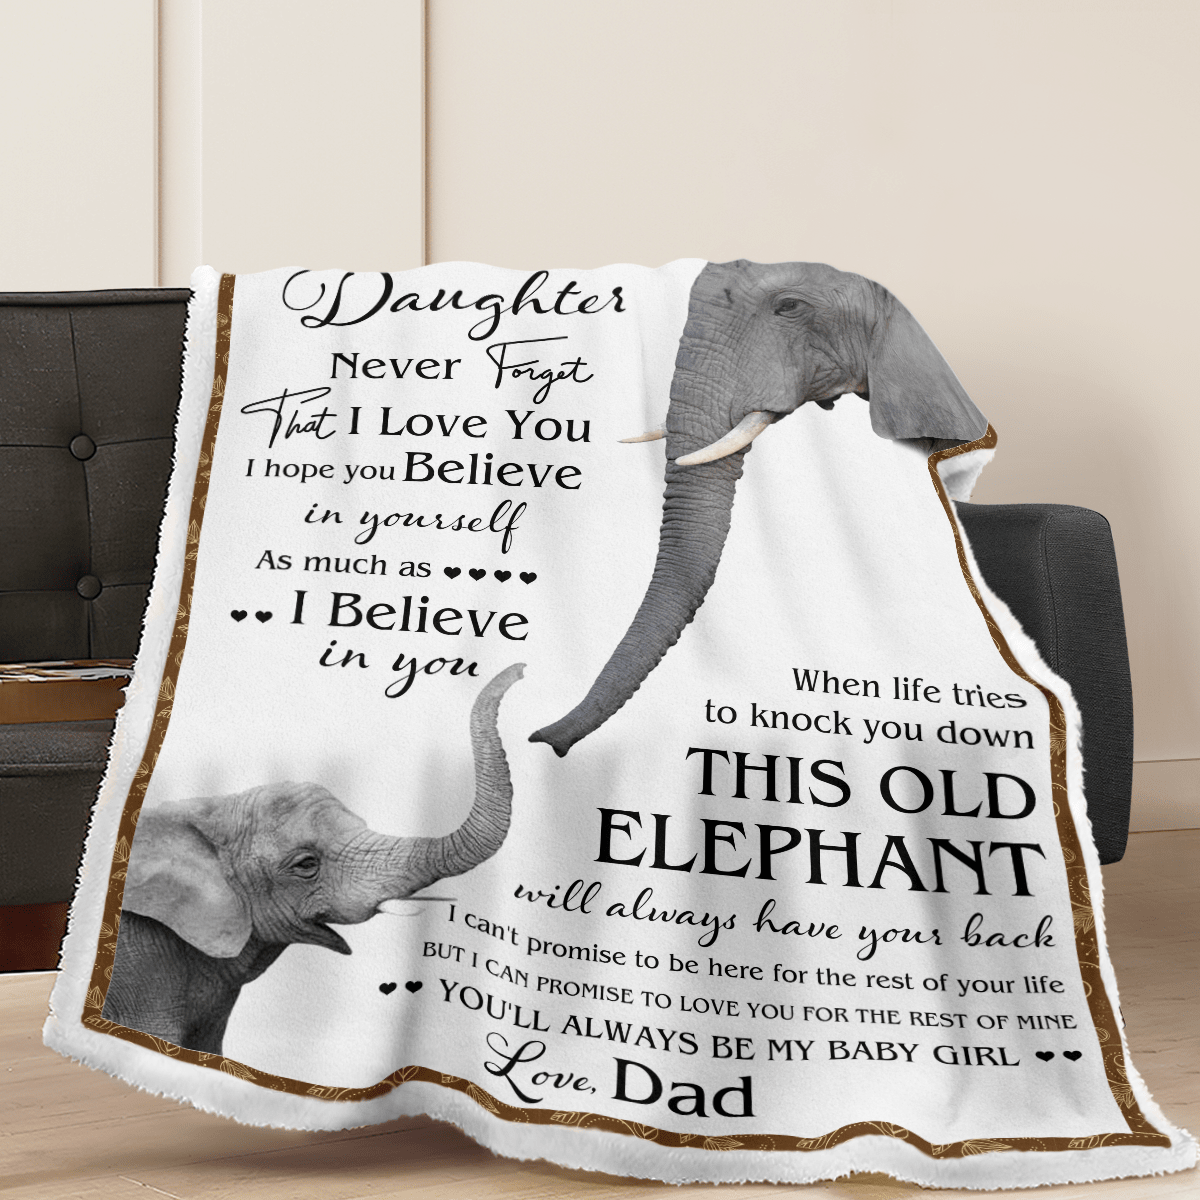 To My Daughter This Old Elephant Quilt Fleece Blanket Bundle Quilt - Sherpa Blanket